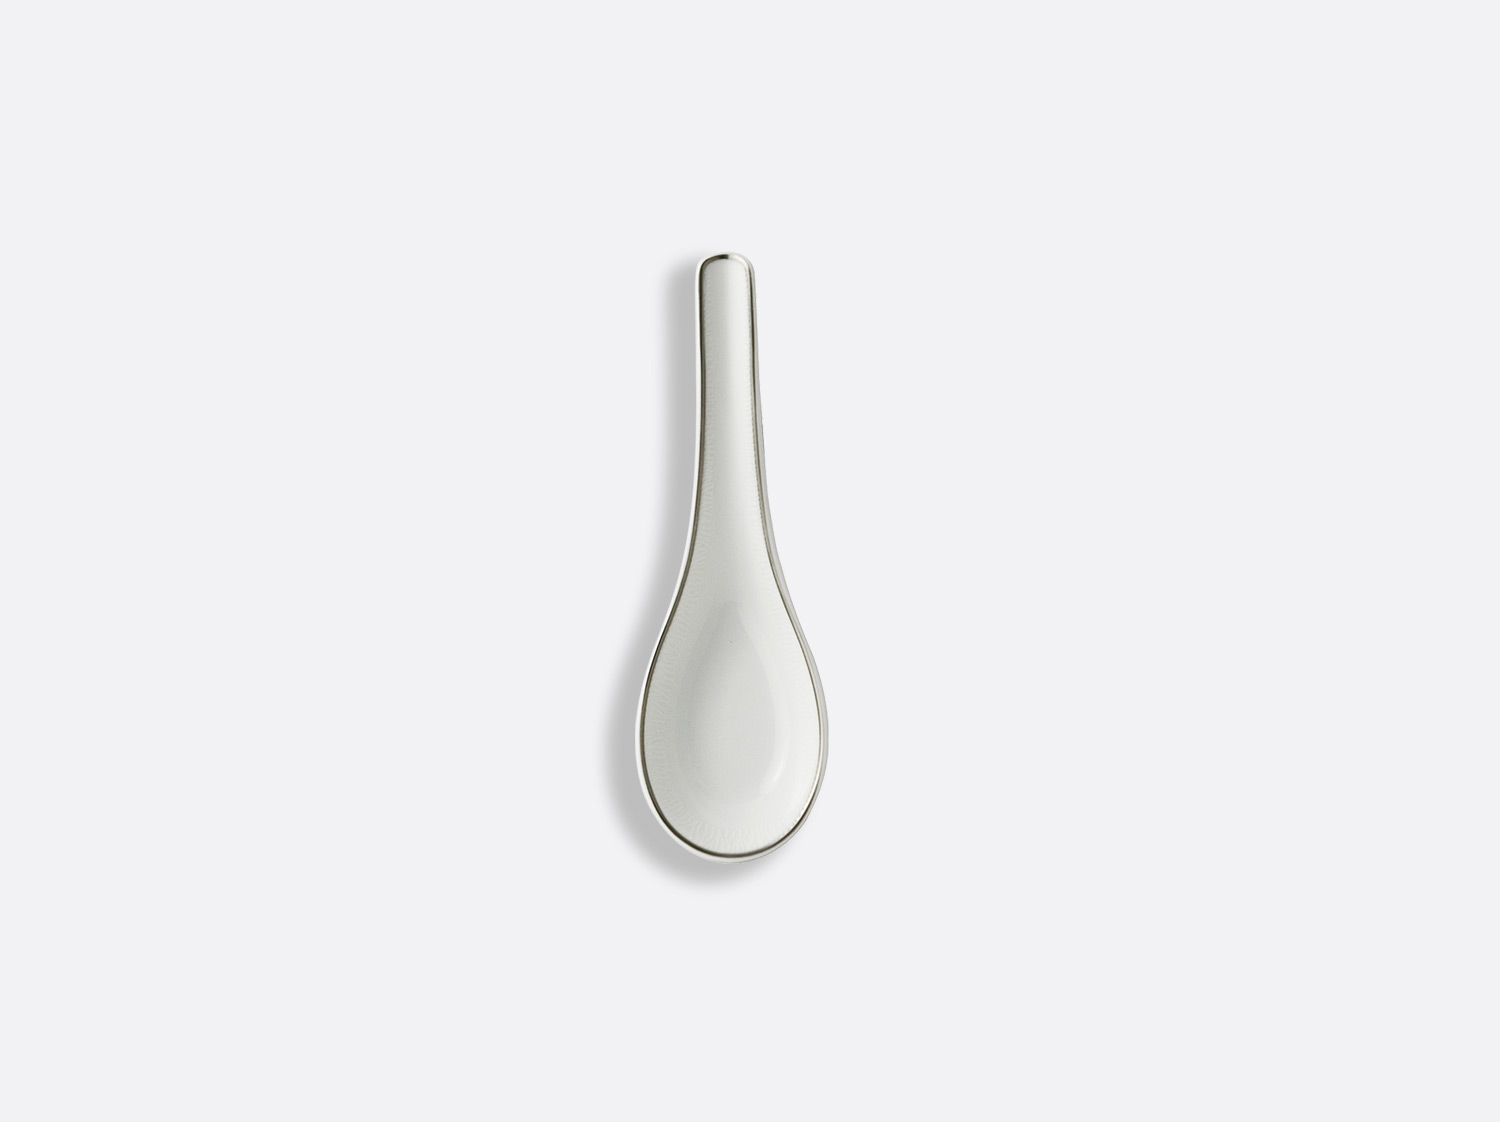 China Chinese spoon of the collection Dune | Bernardaud